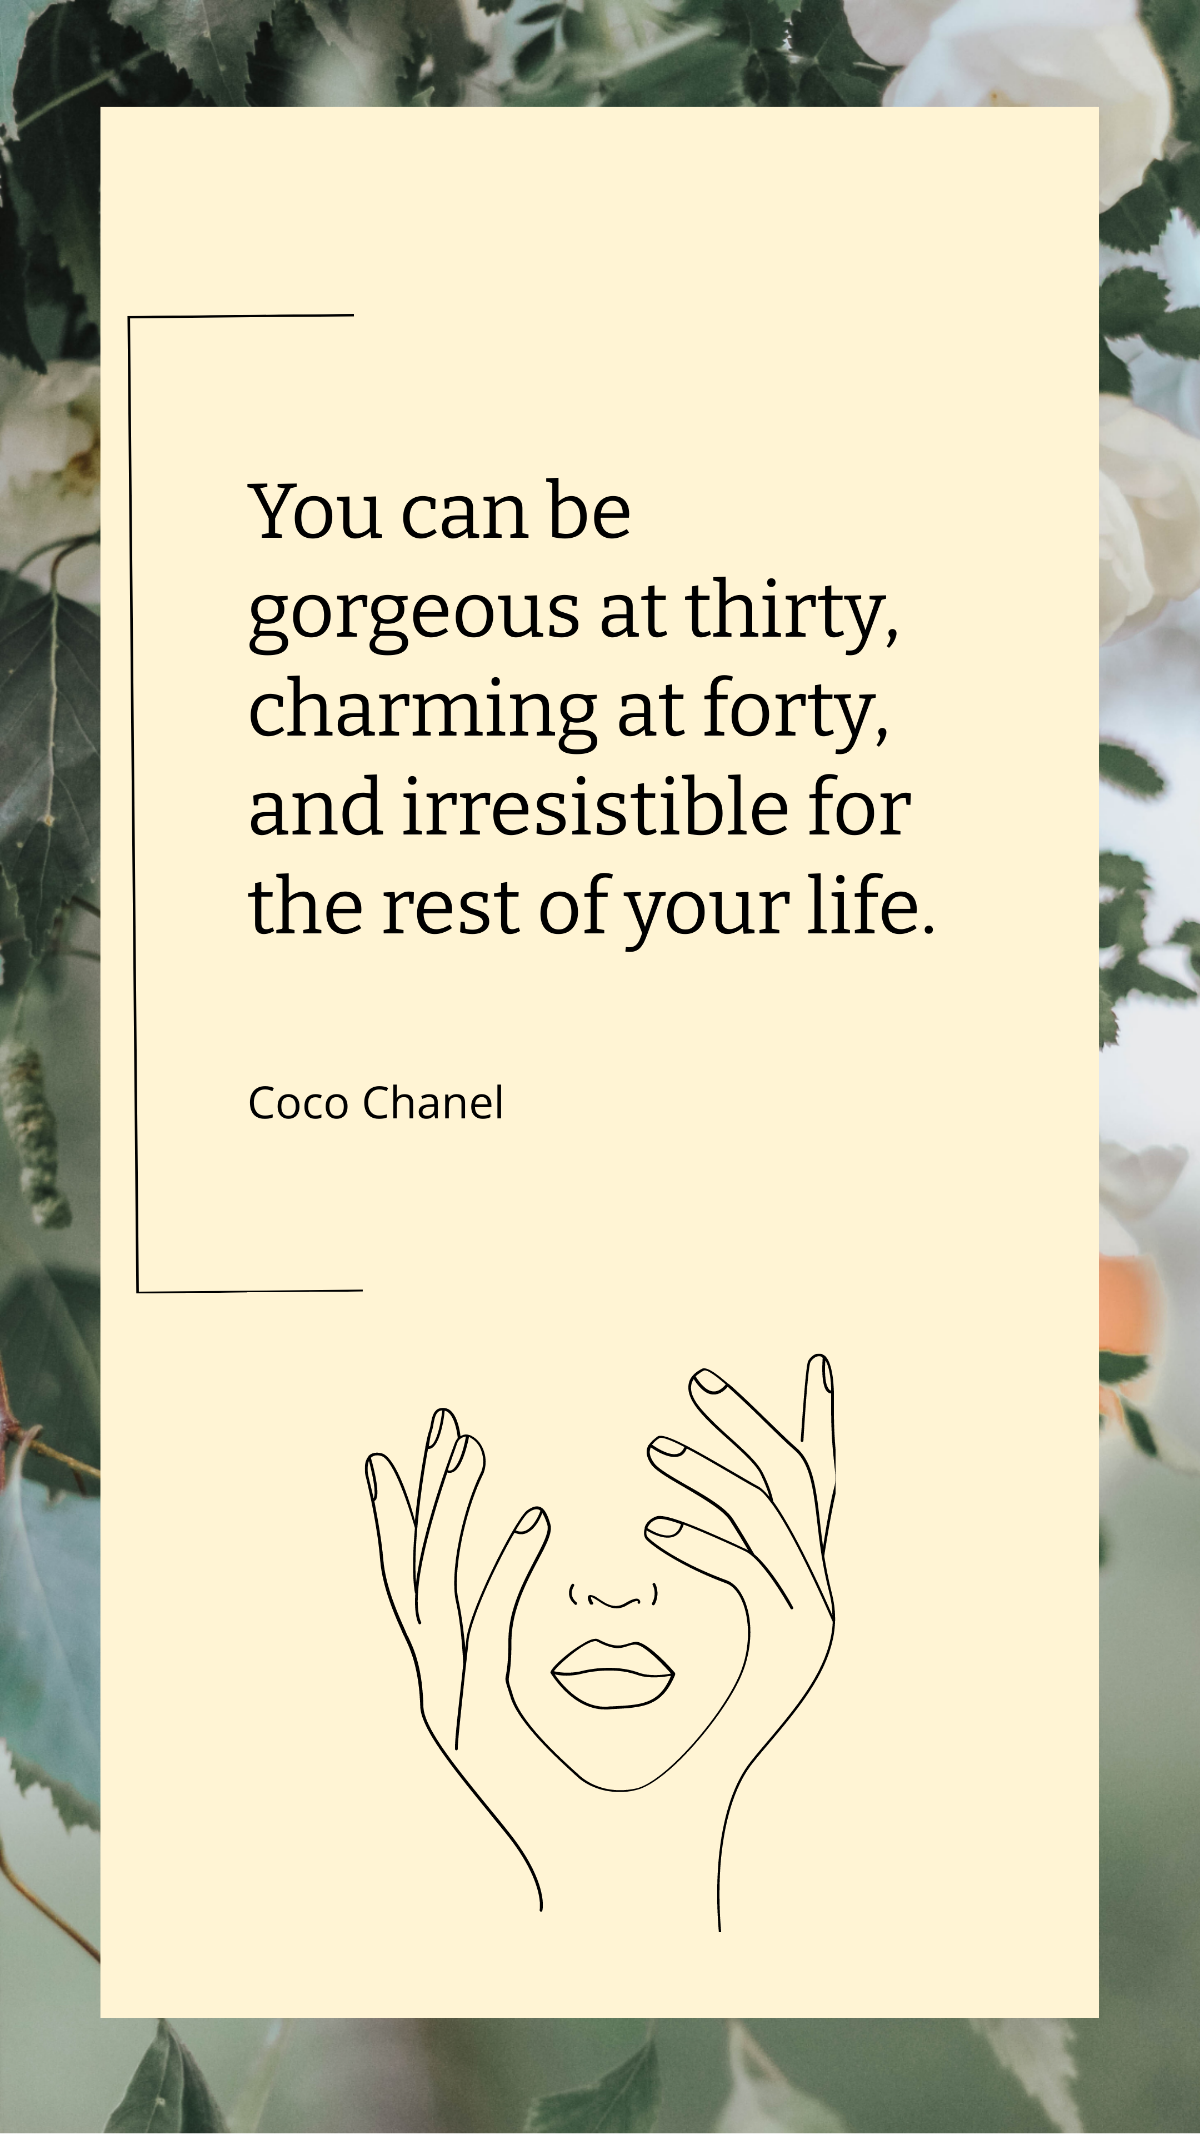 Coco Chanel - You can be gorgeous at thirty, charming at forty, and irresistible for the rest of your life. Template